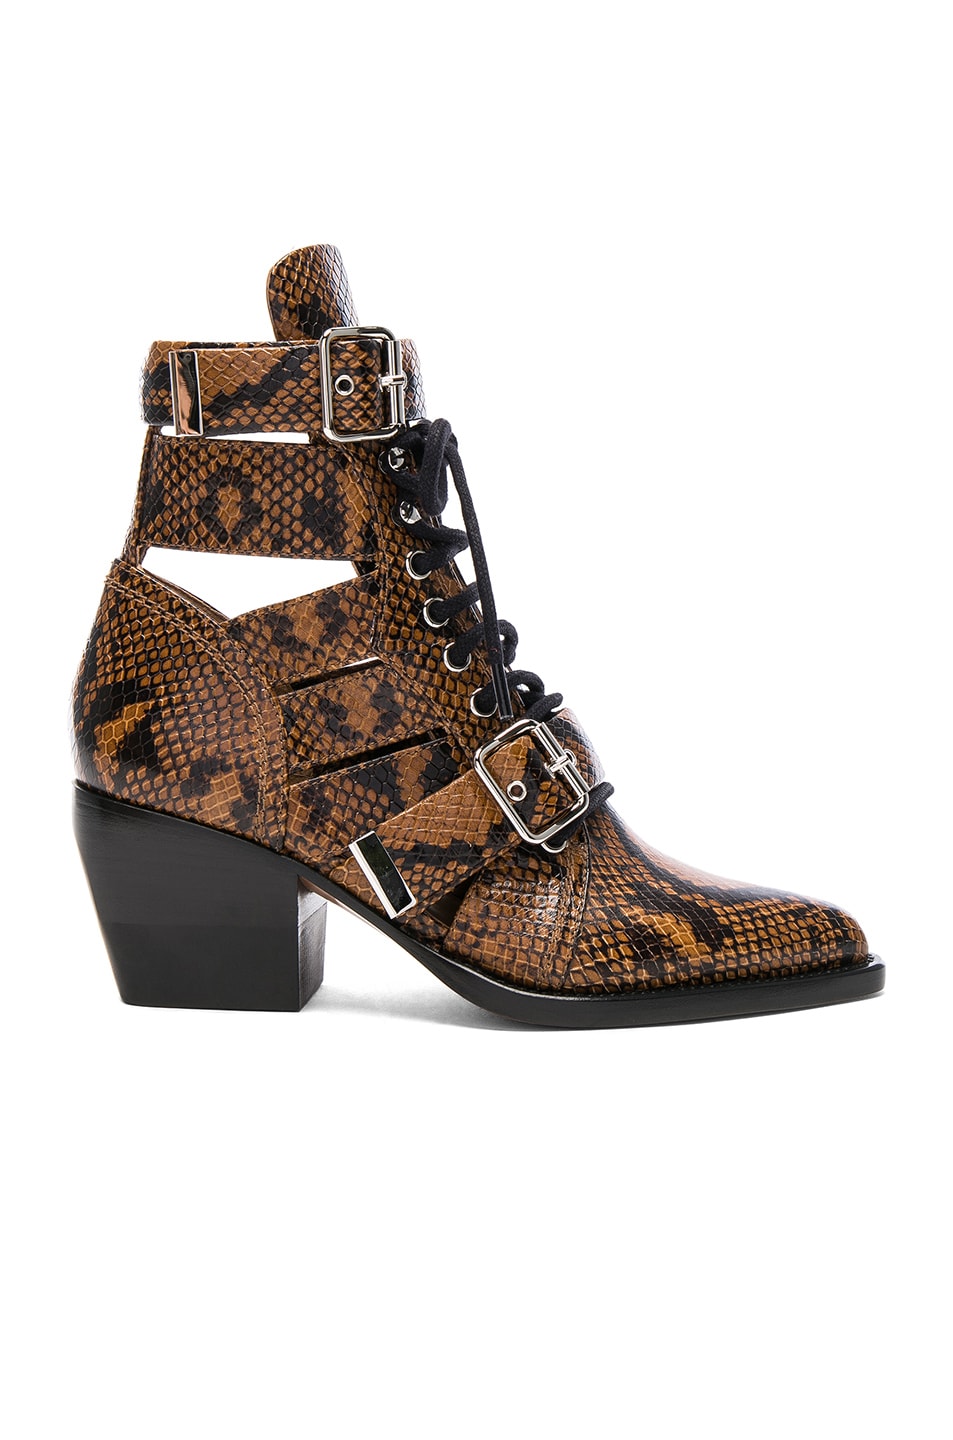 Chloe Rylee Python Print Leather Lace Up Buckle Boots in Light Tan | FWRD